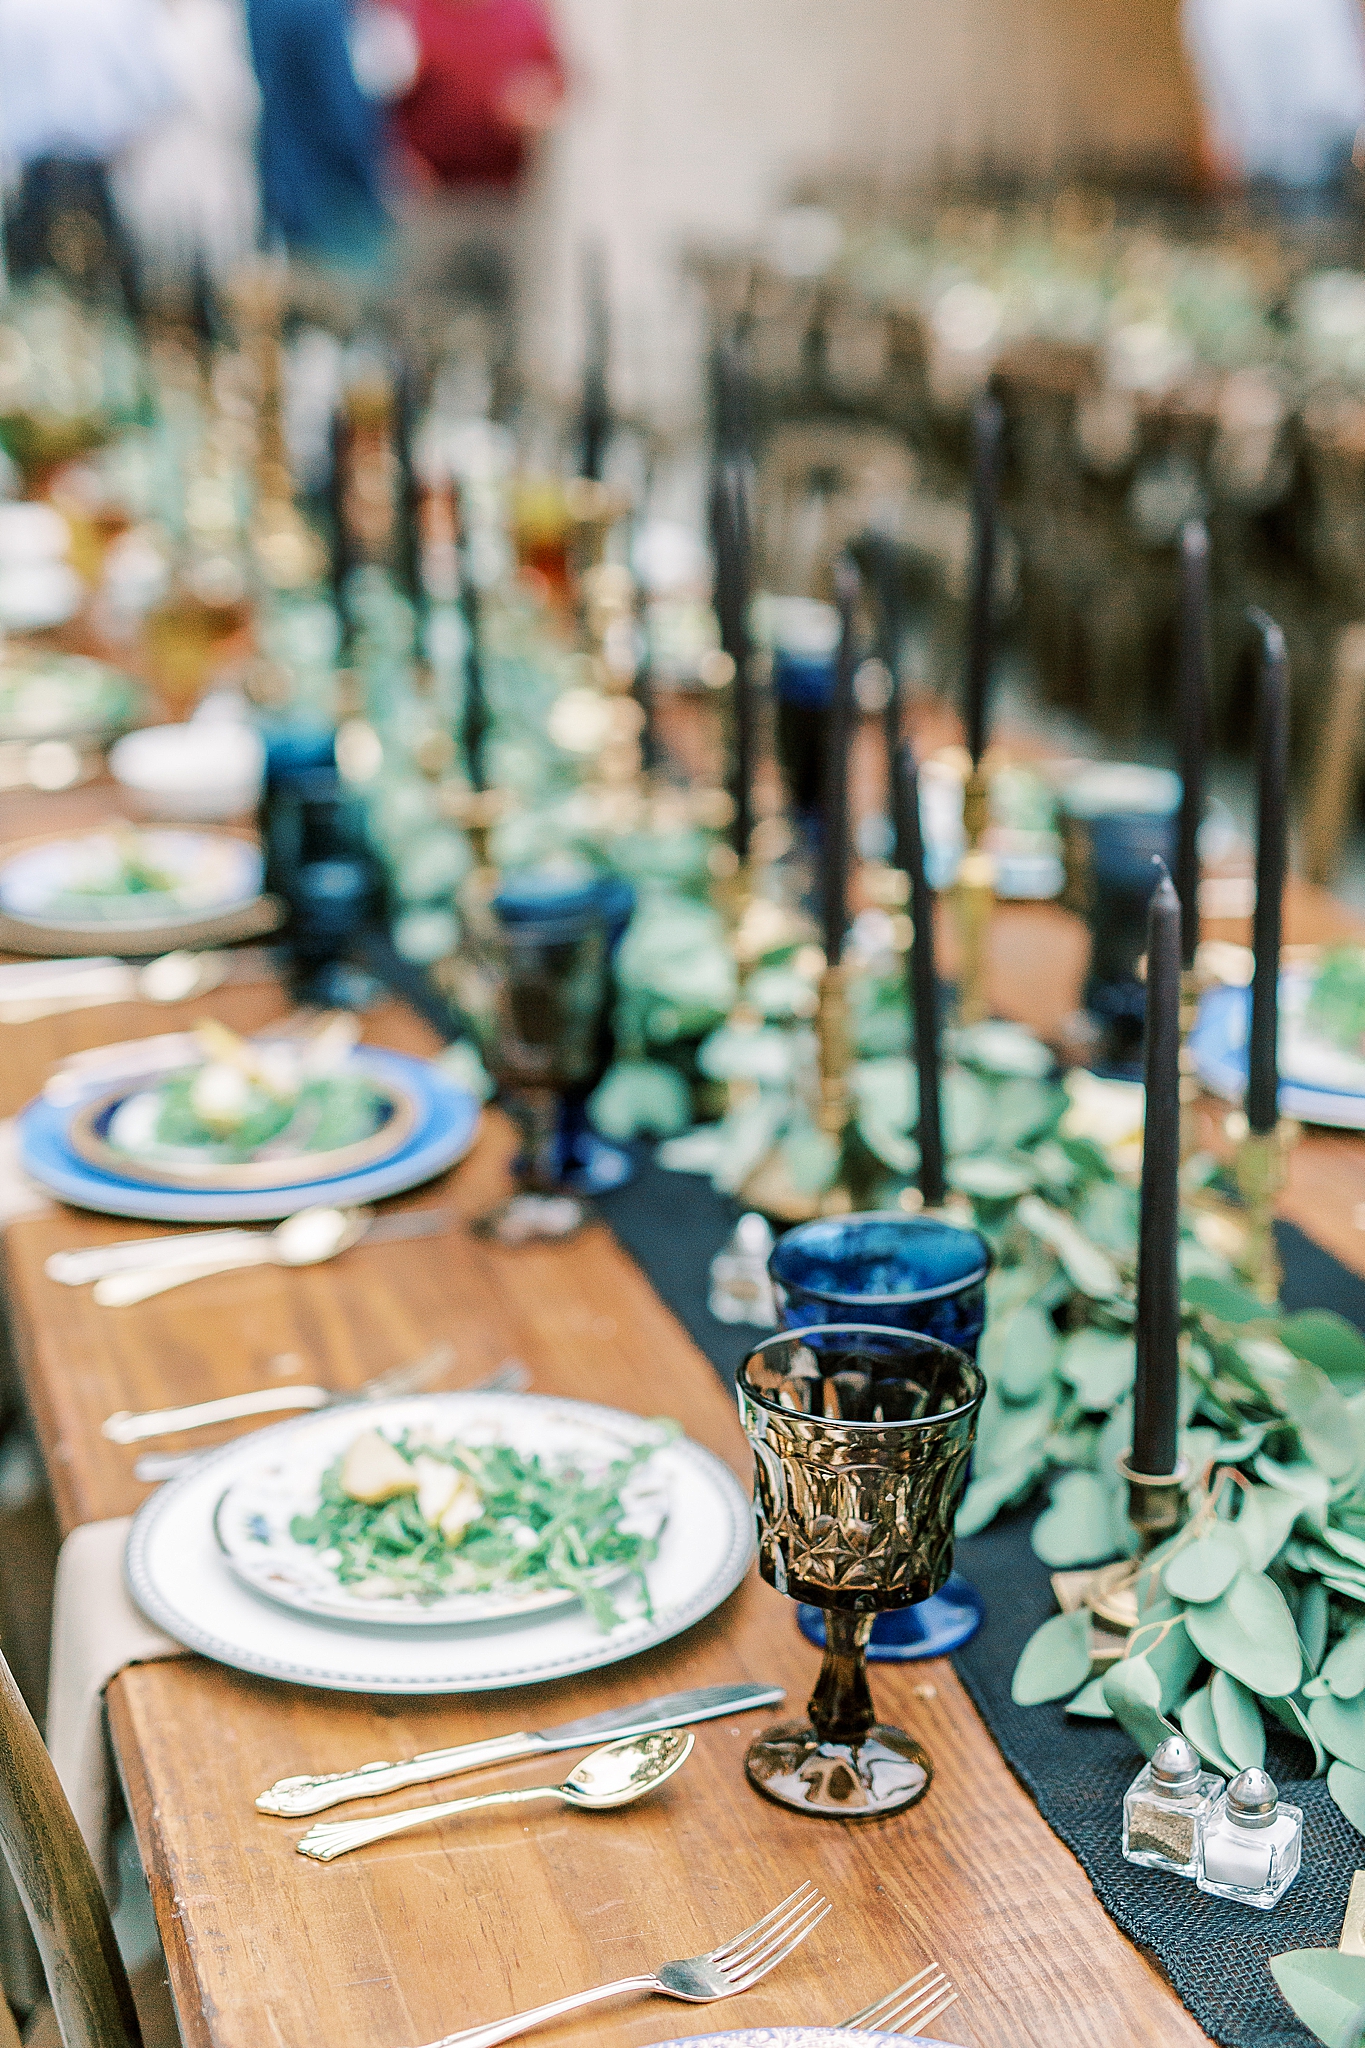 place settings with vintage china and glassware